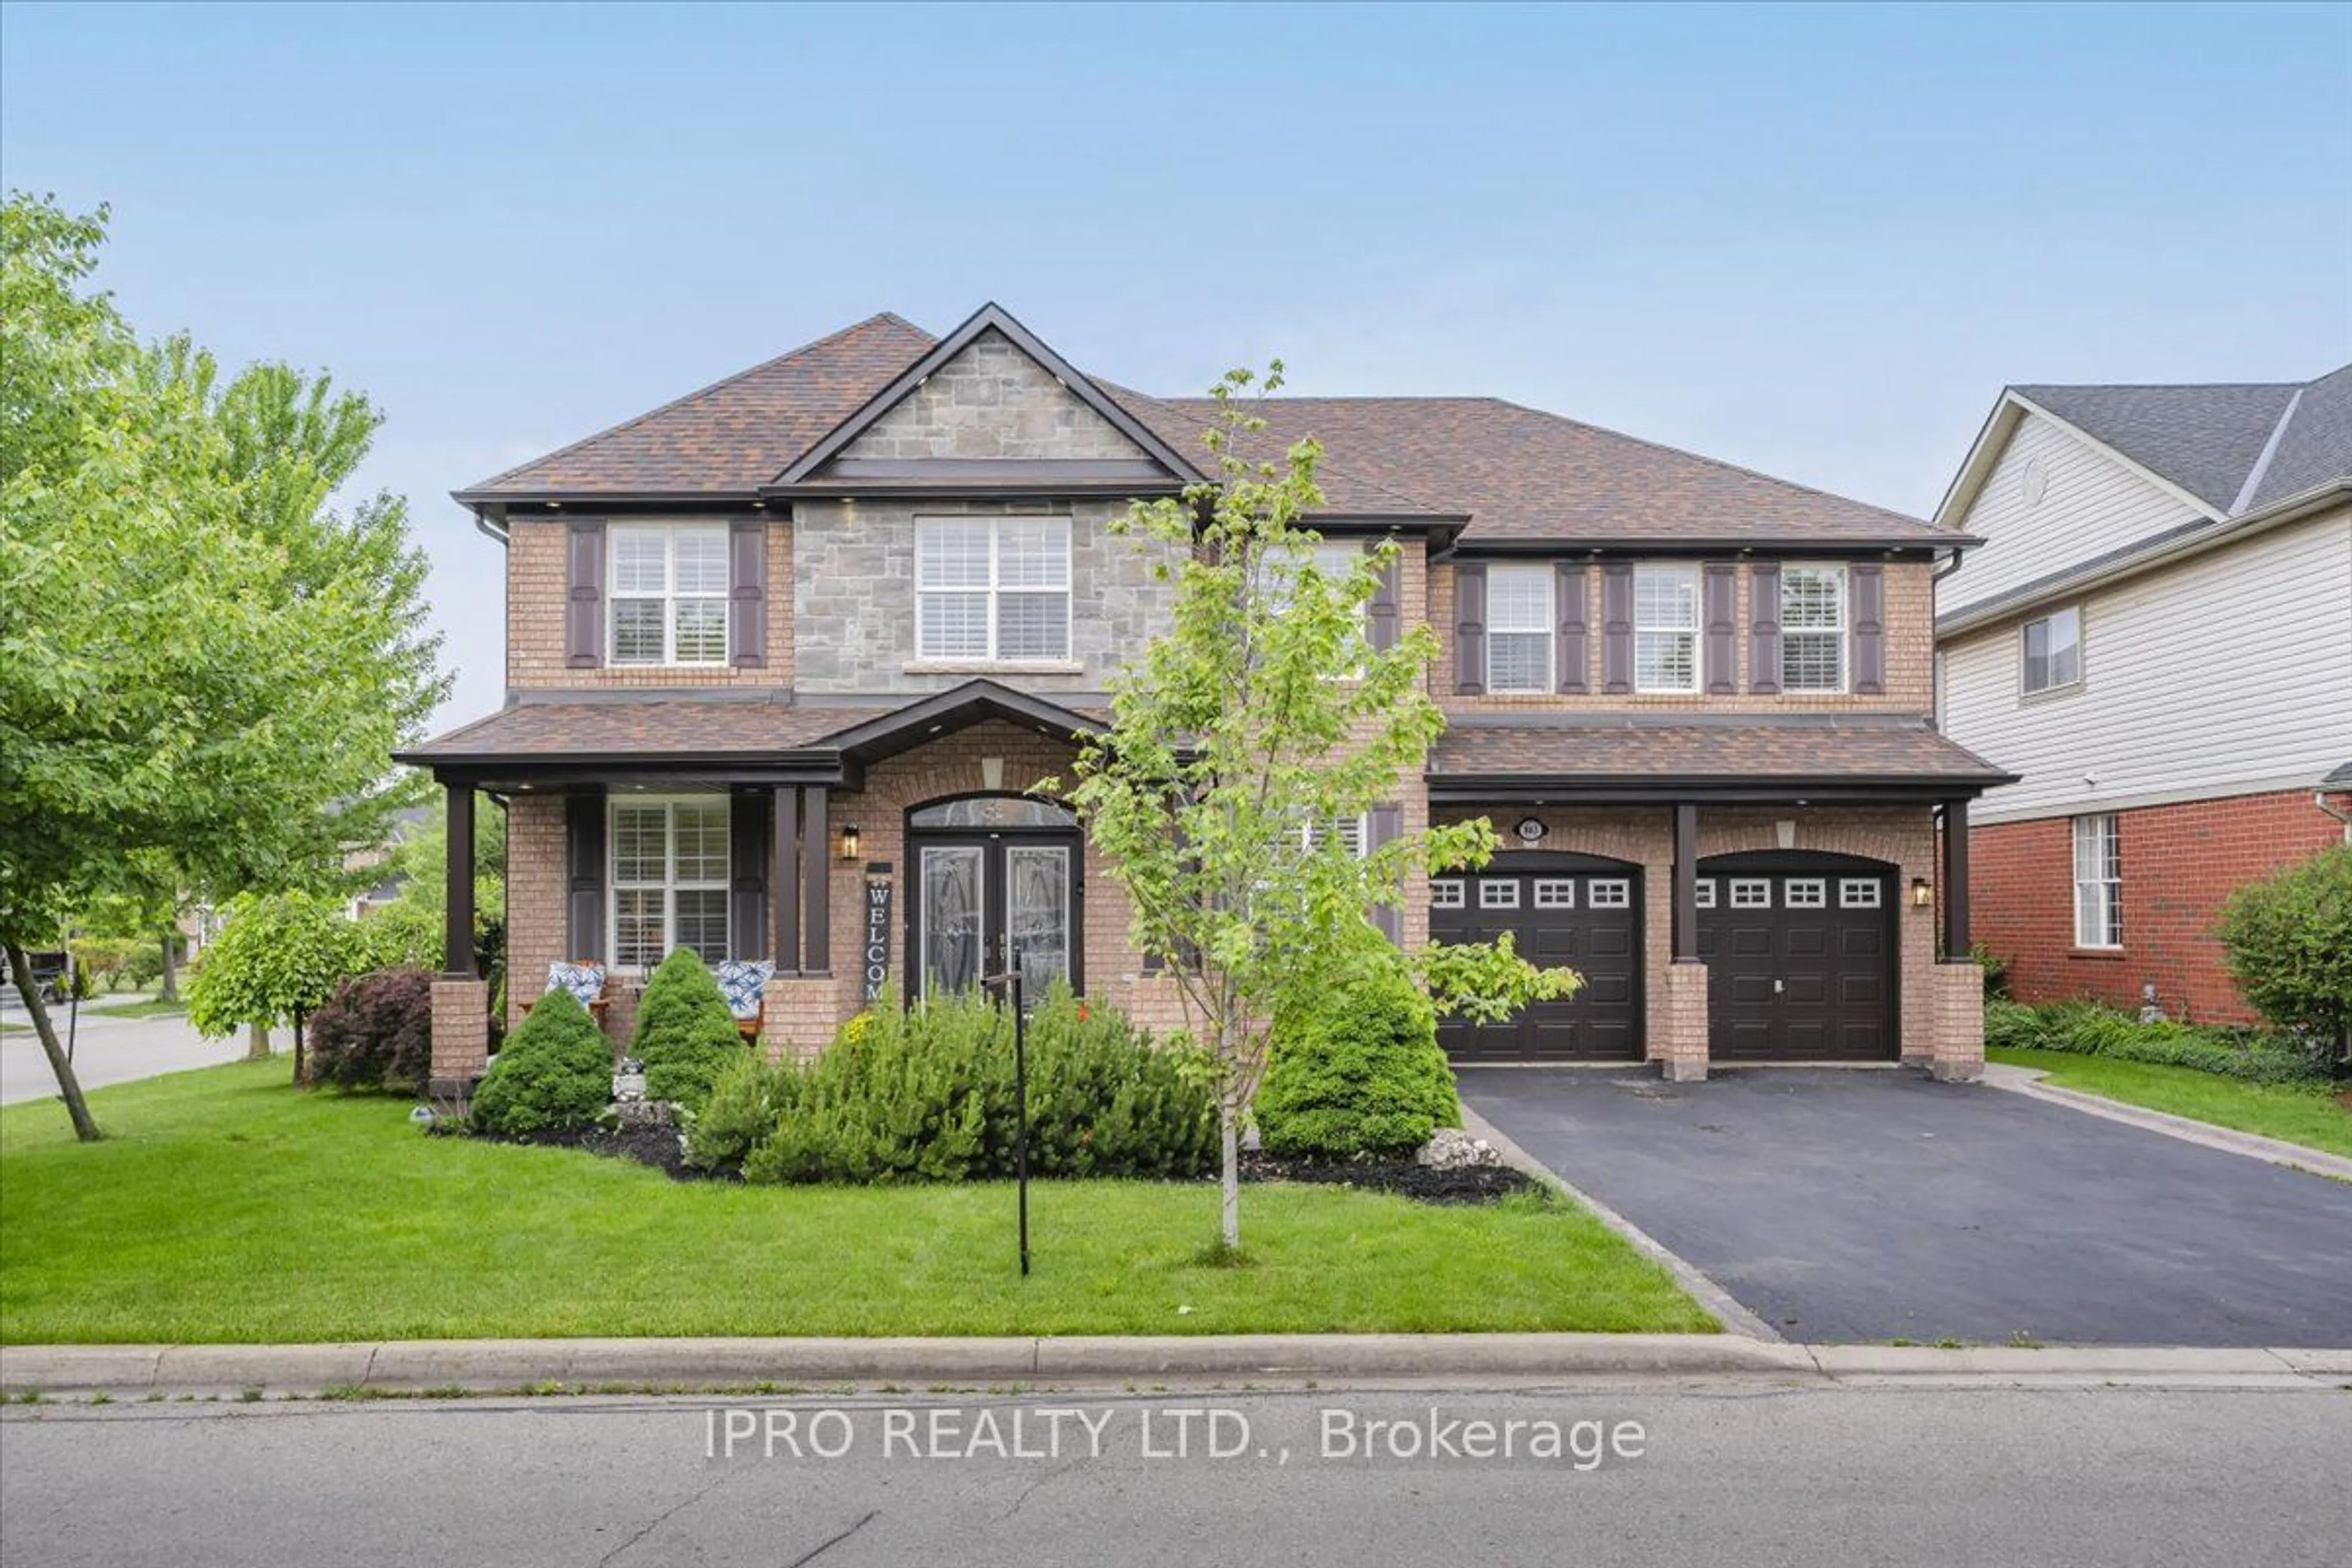 Home with brick exterior material for 883 Somerville Terr, Milton Ontario L9T 5V1